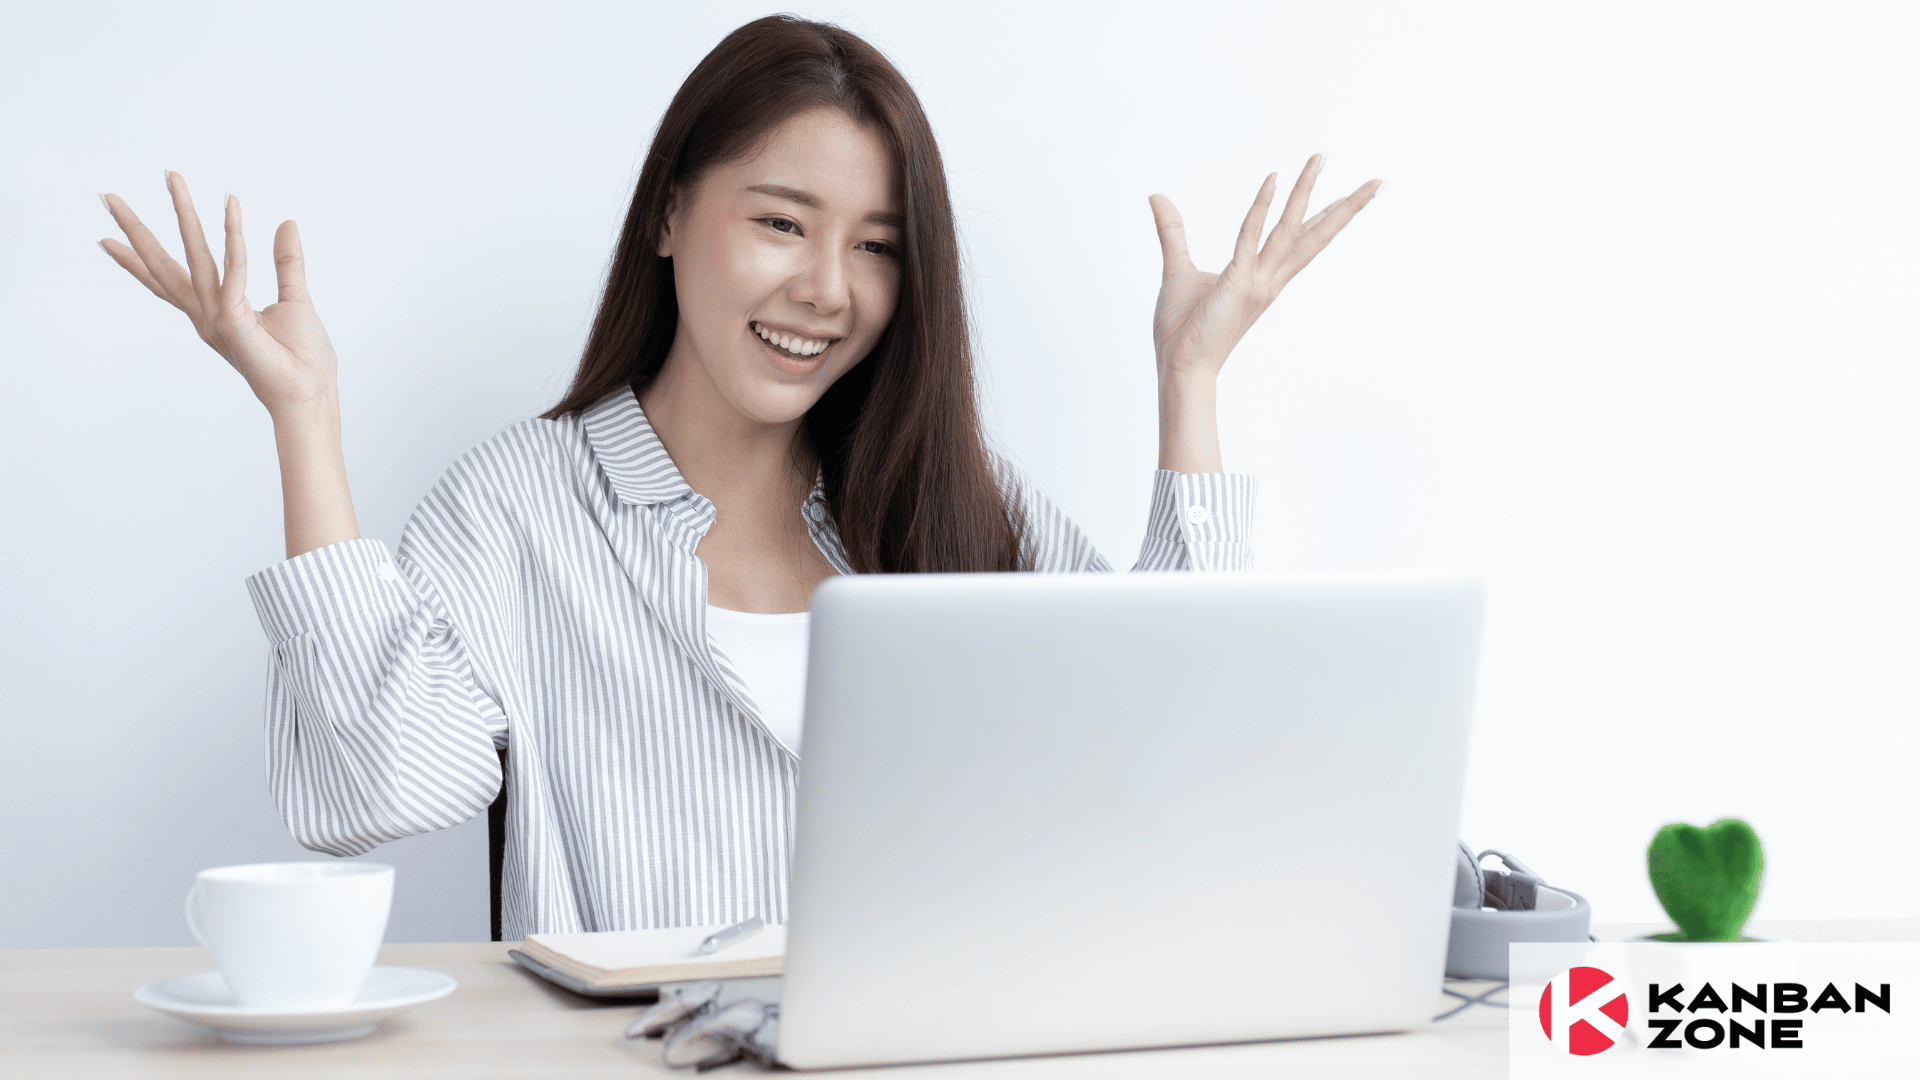 Young woman looking happy in front of laptop